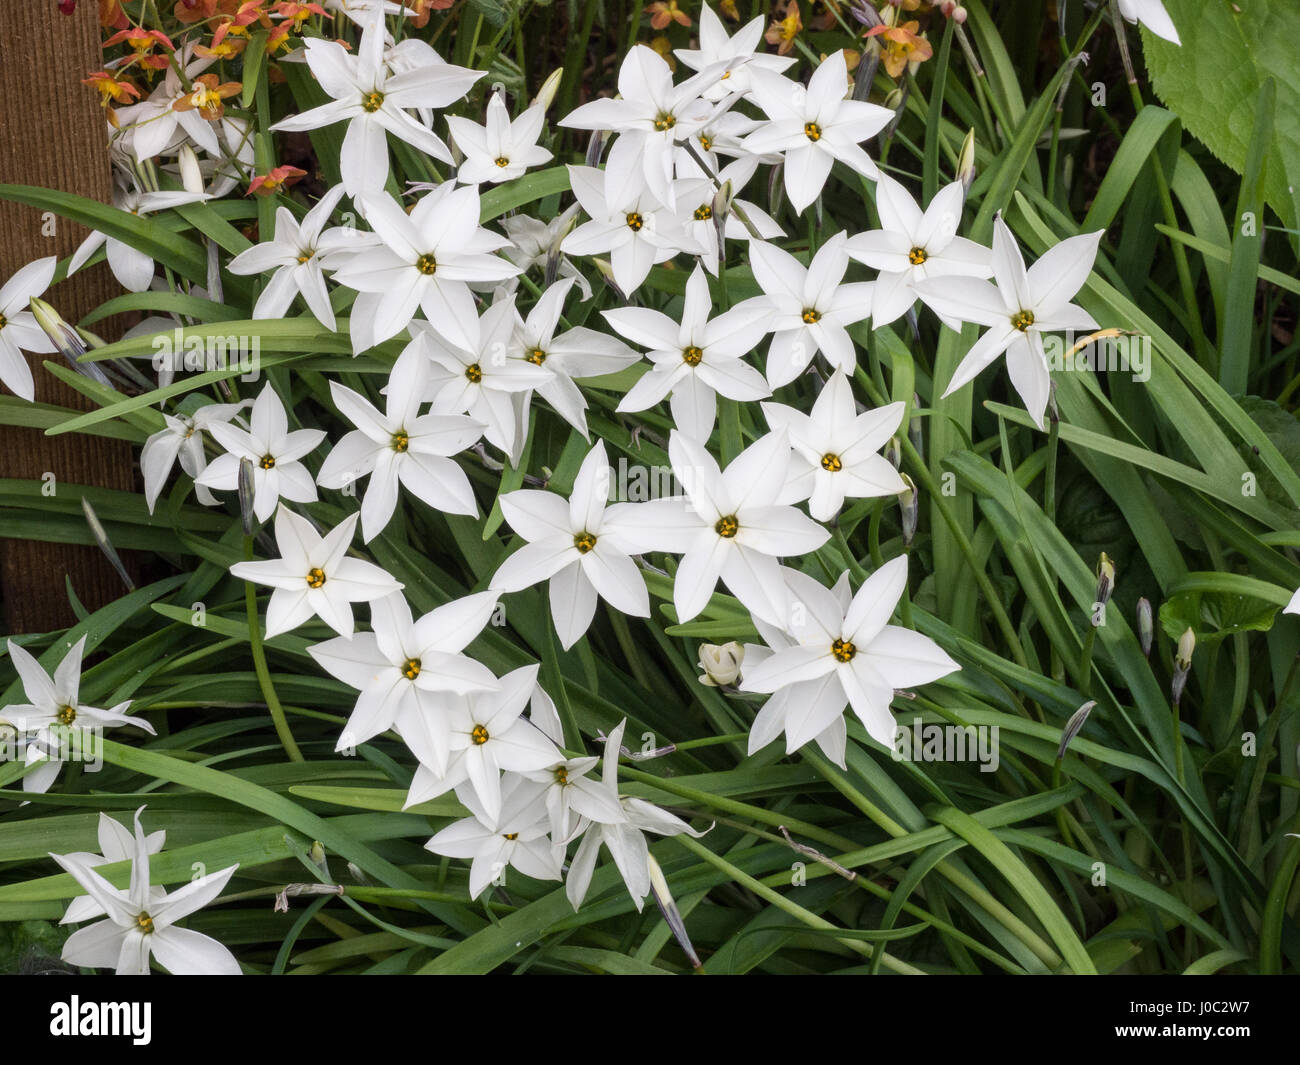 Close up of a group of flowers of Ipheion Alberto Castillo Stock Photo